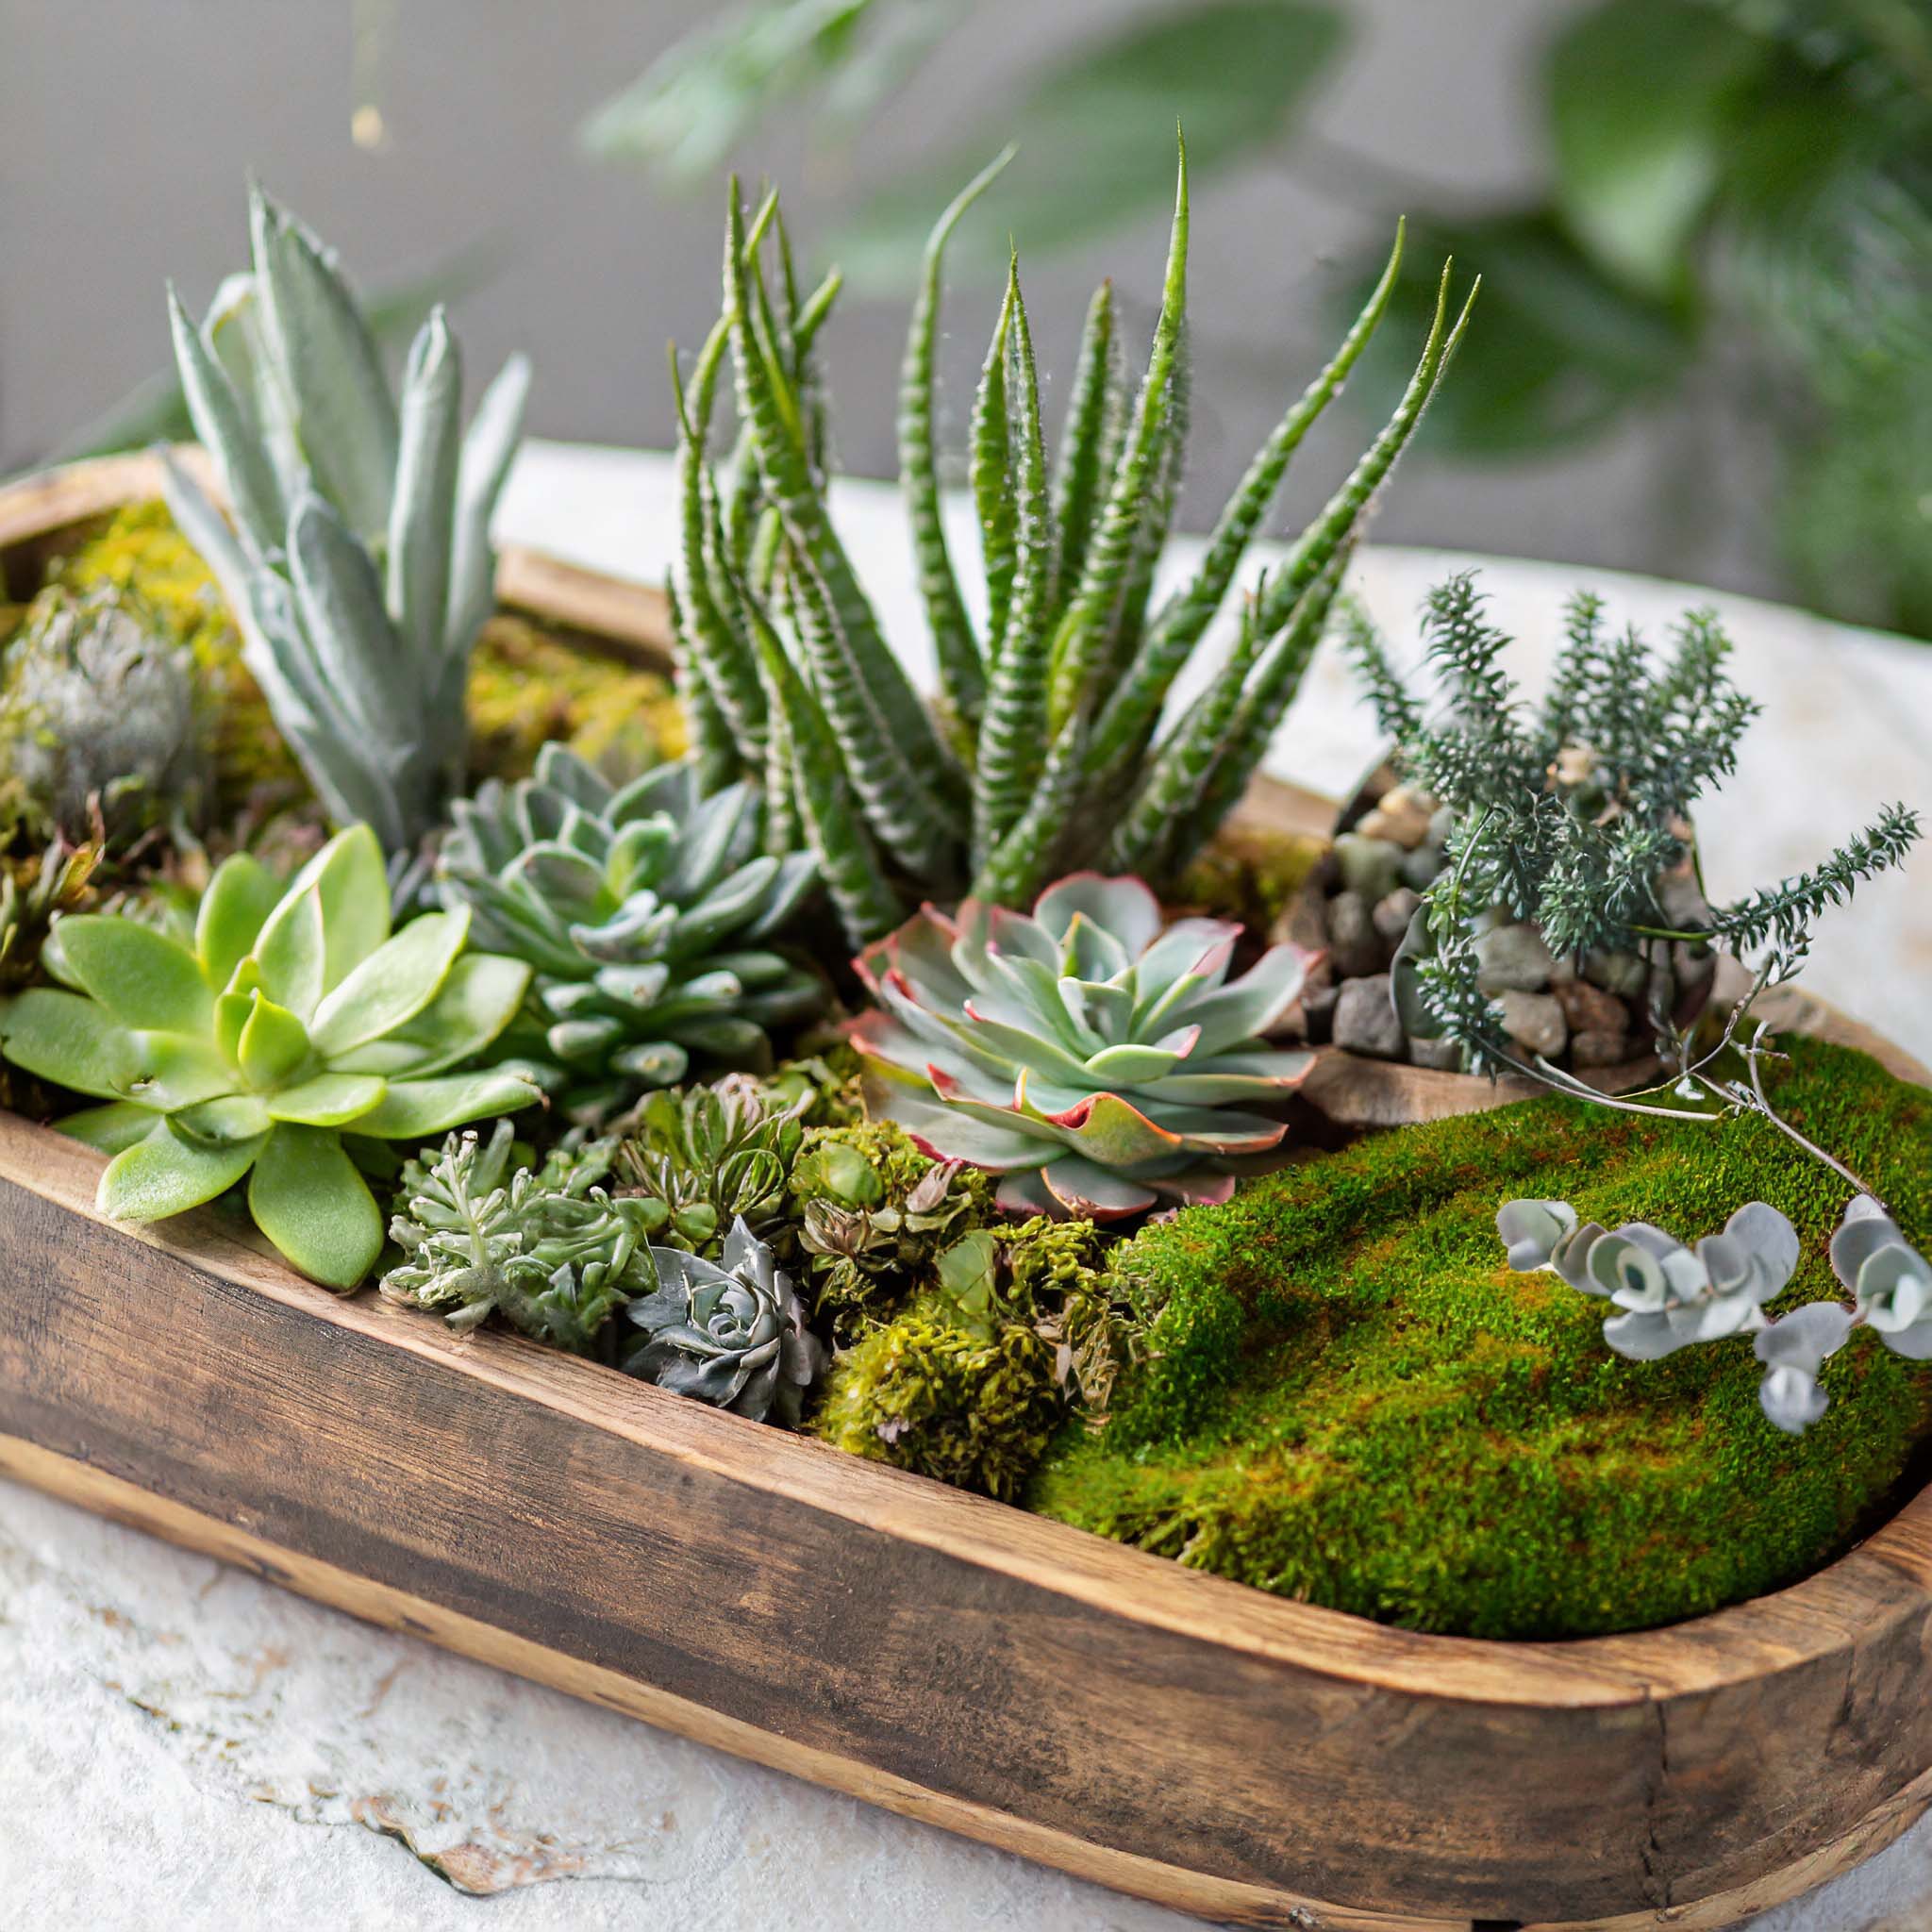 Wooden dough bowl filled with succulents and moss on concrete table.